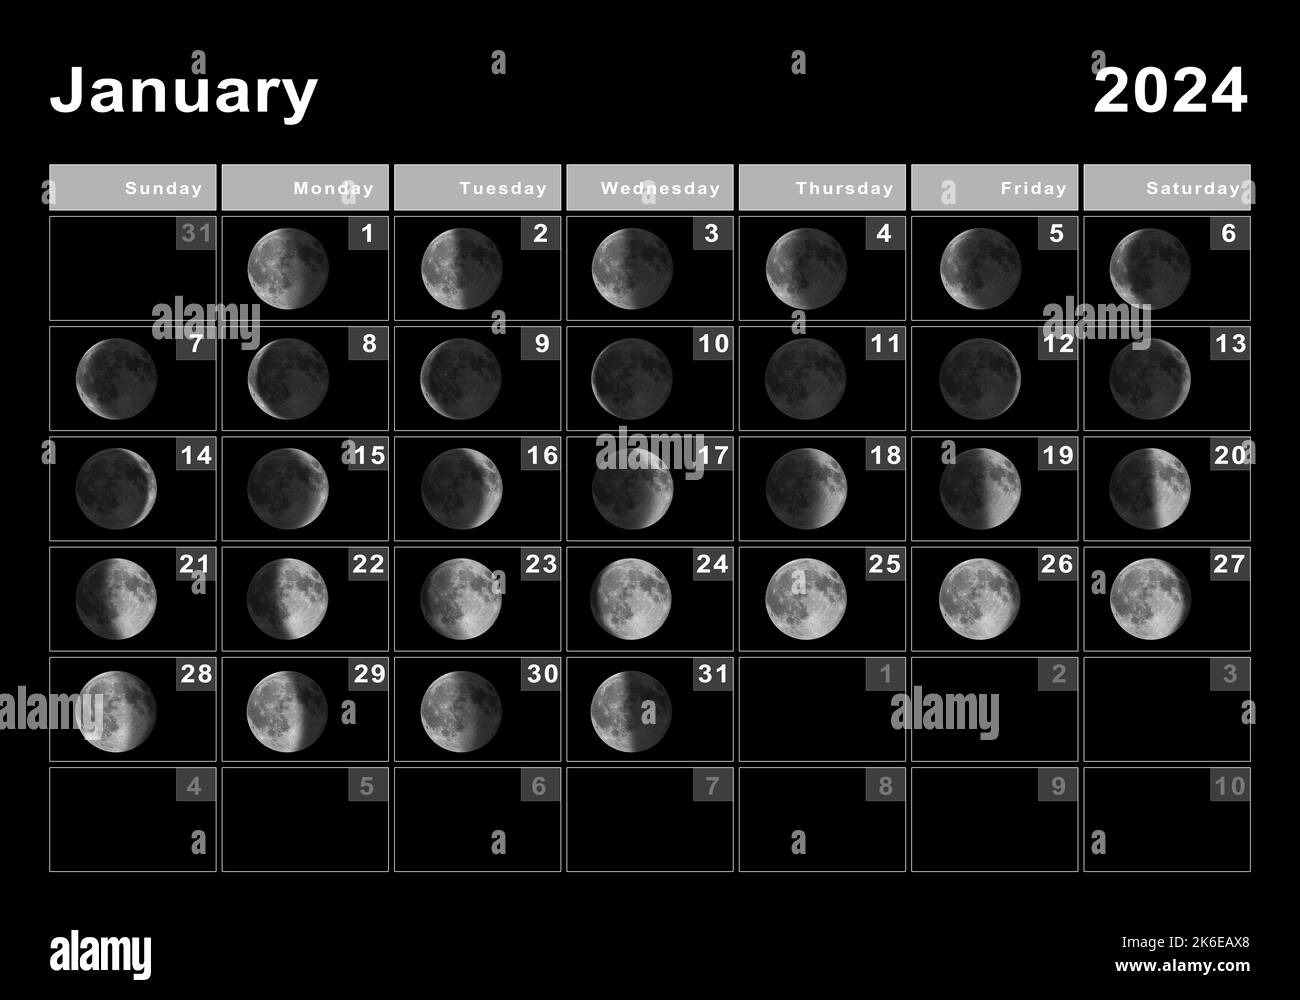 Calendar For January 2024 With Moon Phases Dareen Maddalena